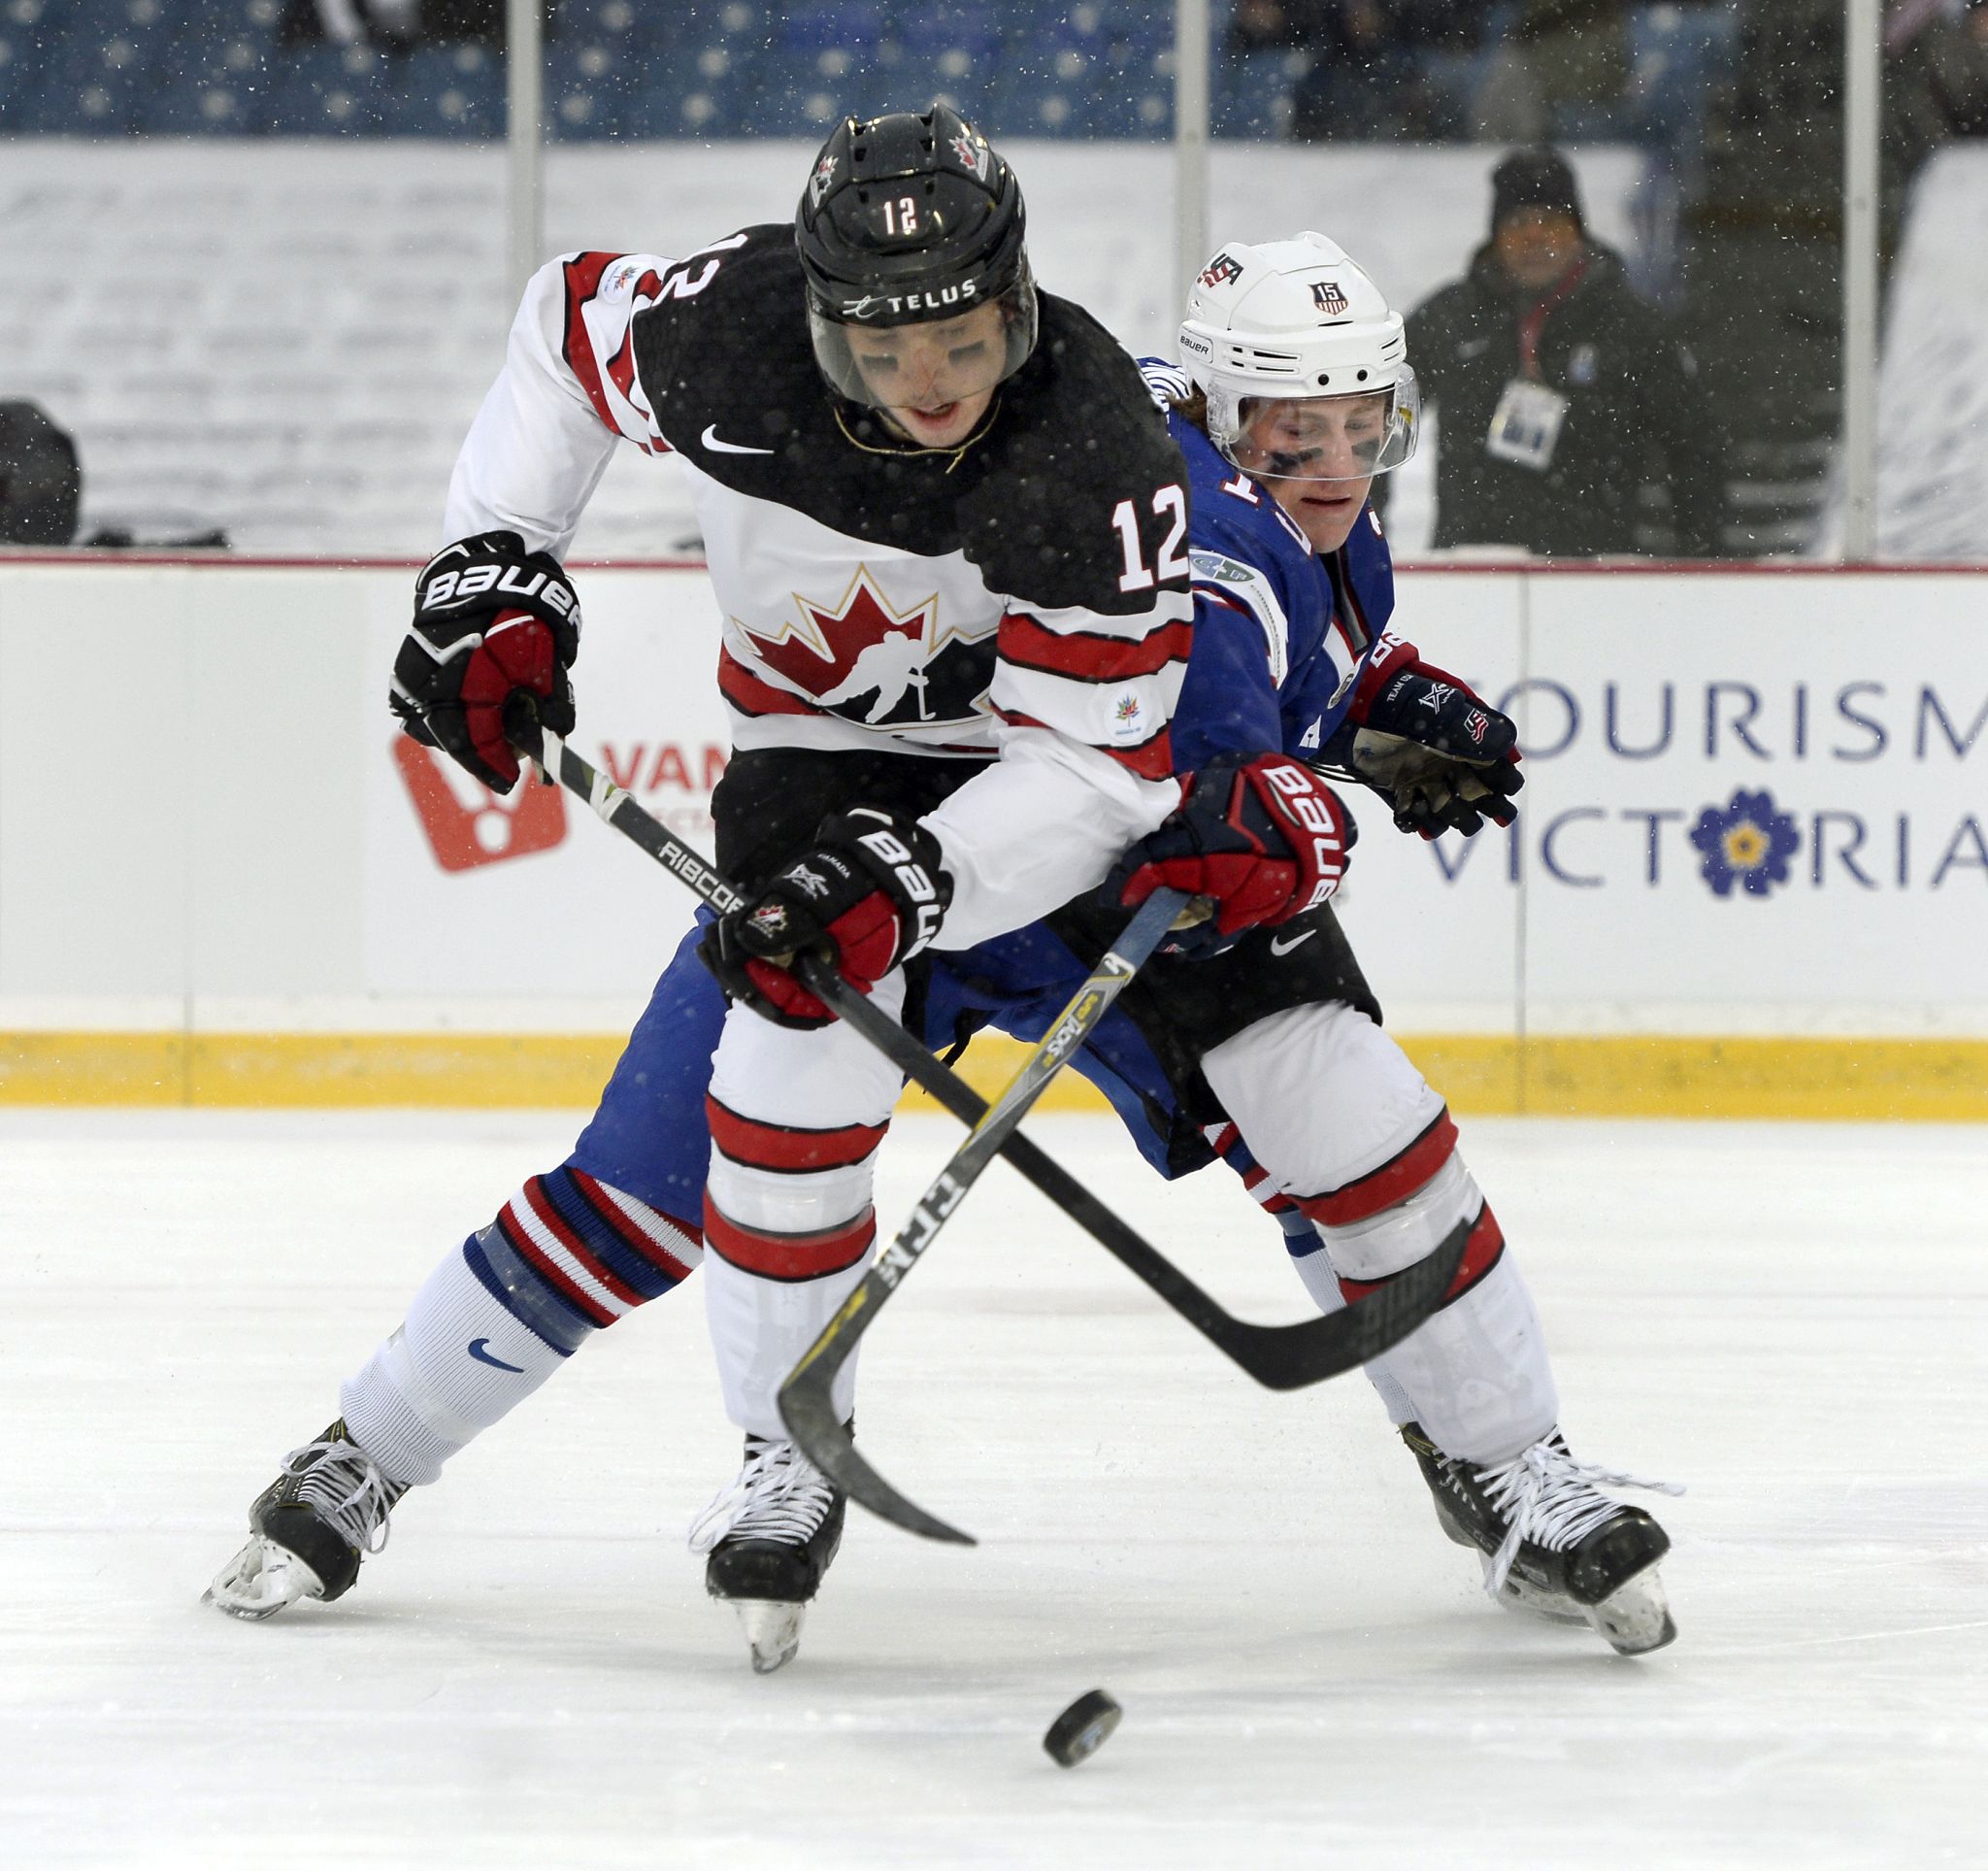 U.S. rallies to 4-3 shootout win over Canada in outdoor game